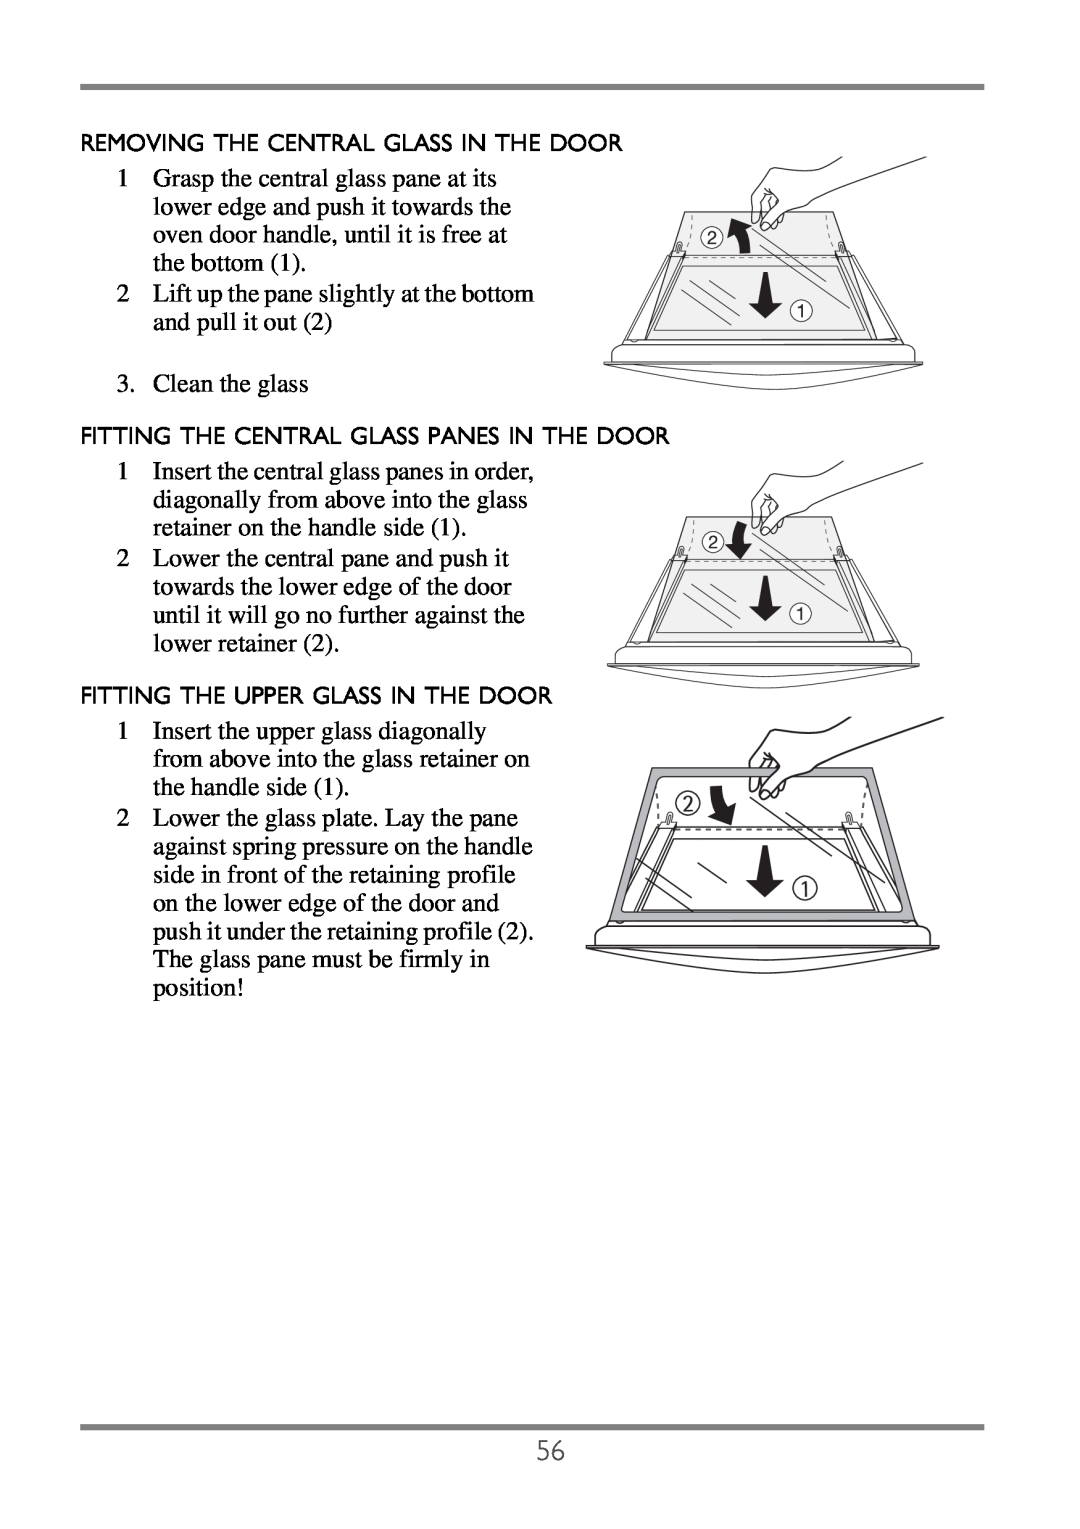 Electrolux EKC60752 user manual Removing The Central Glass In The Door, Fitting The Central Glass Panes In The Door 